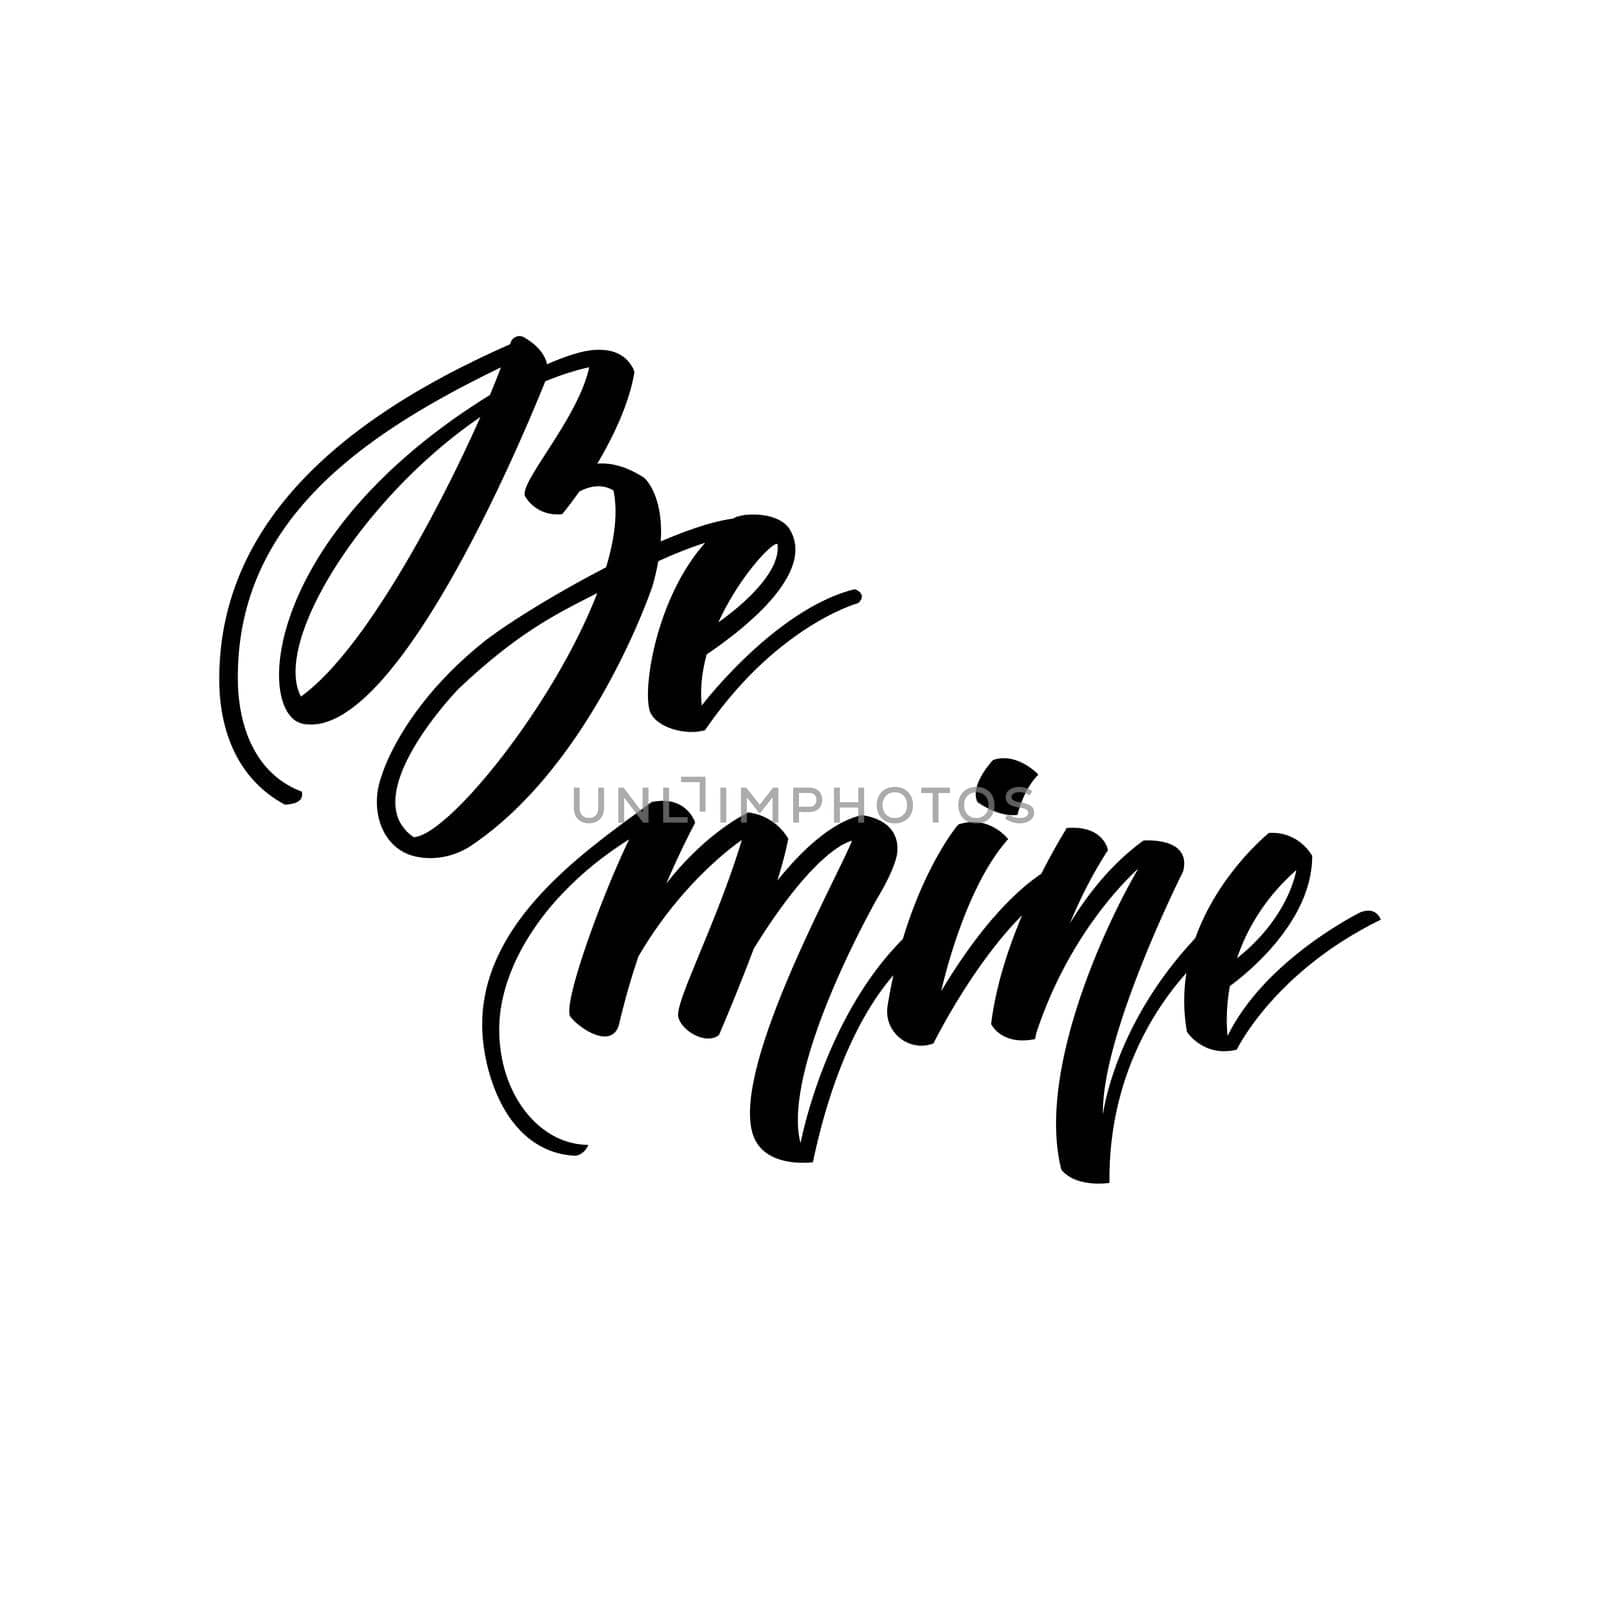 Be mine. Inspirational romantic lettering isolated on white background. illustration for Valentines day greeting cards, posters, print on T-shirts and much more.